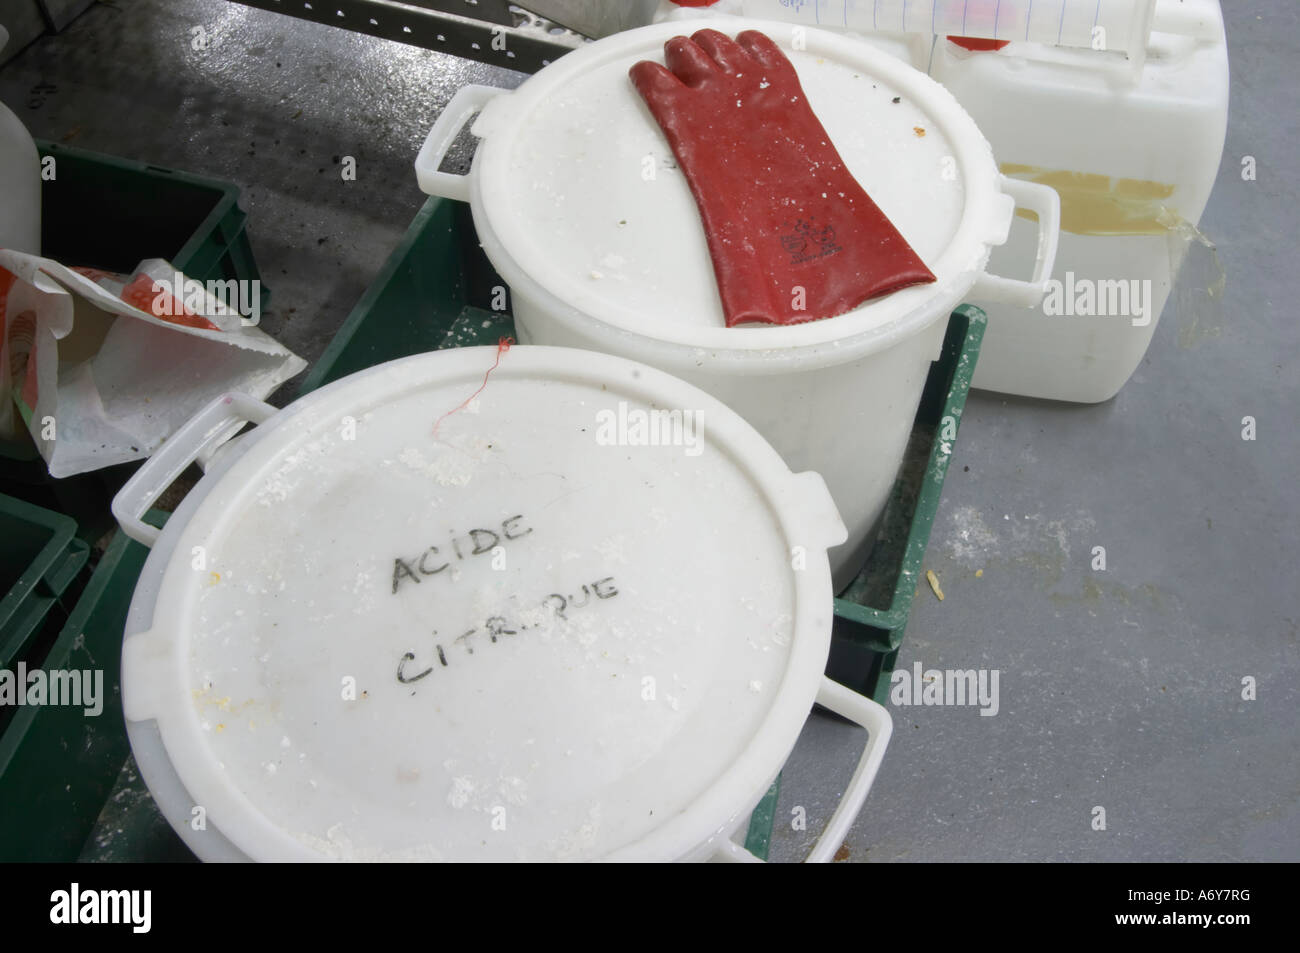 Plastic bucket with Acide Citrique, Citric Acid, C6H8O7, frequently used in wine production. Citrus. With a rubber glove. Mas La Chevaliere. near Beziers. Languedoc. France. Europe. Stock Photo